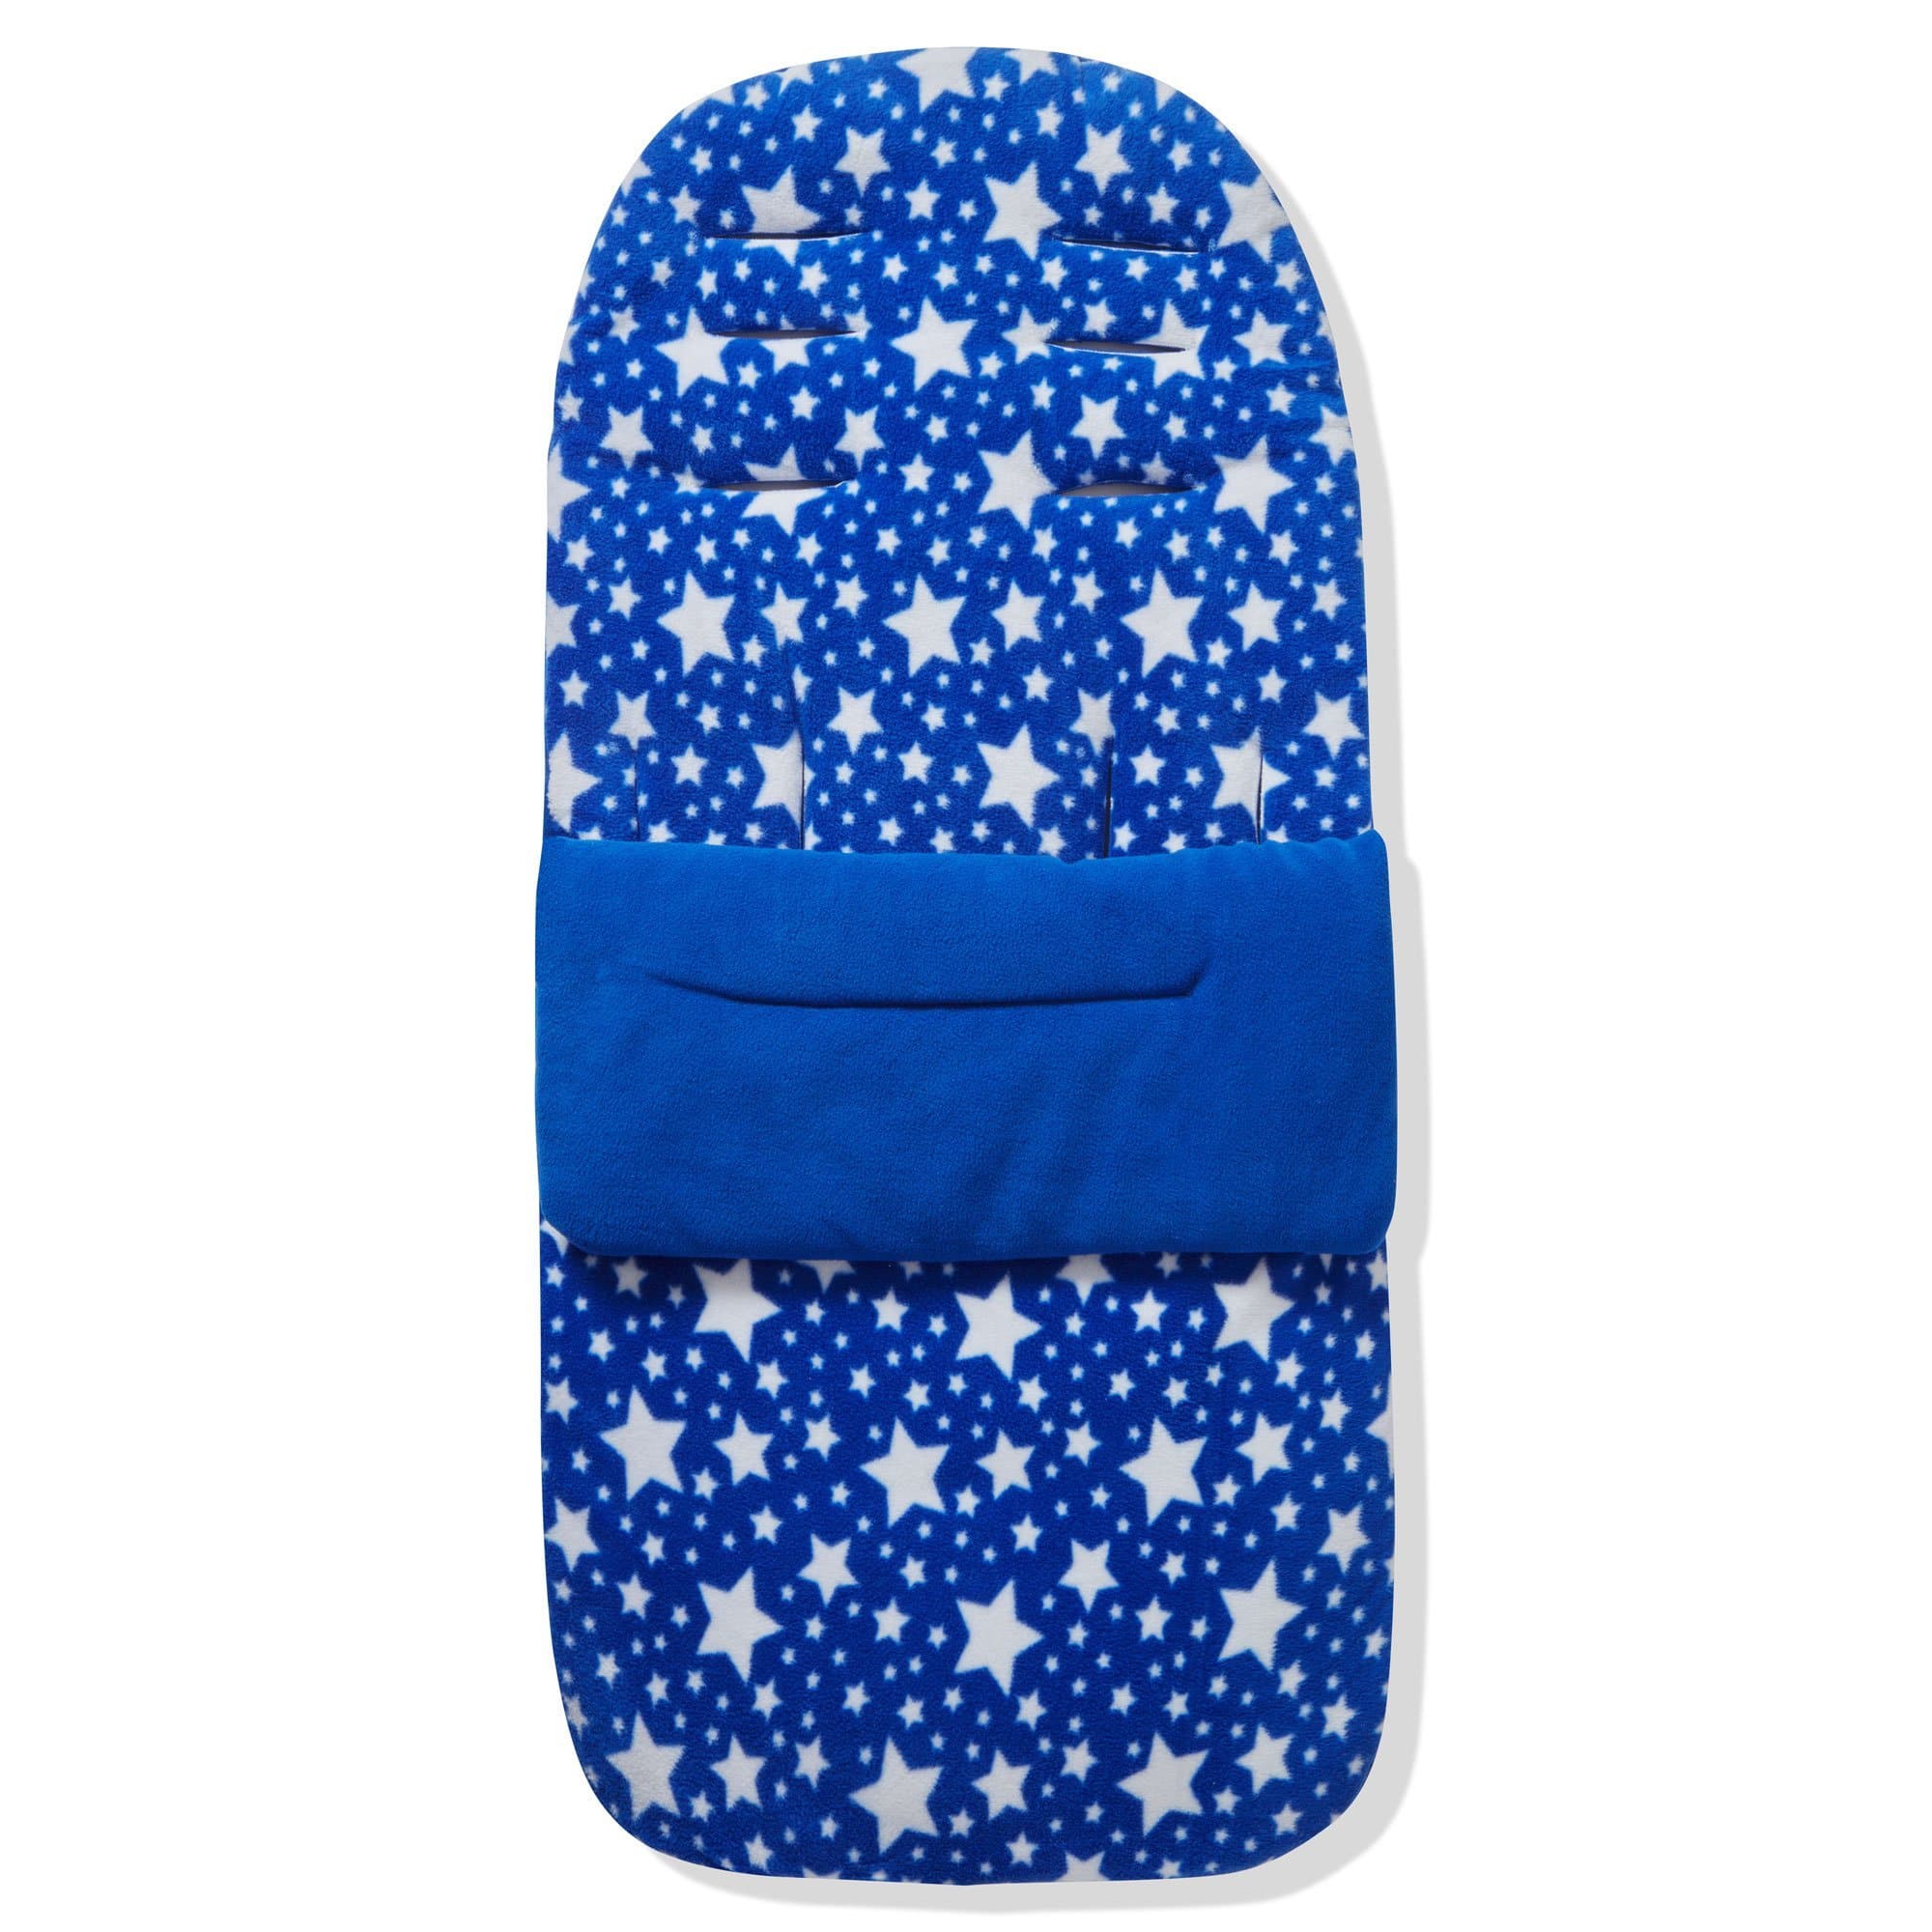 Fleece Footmuff / Cosy Toes Compatible with My Child - Blue Star / Fits All Models | For Your Little One